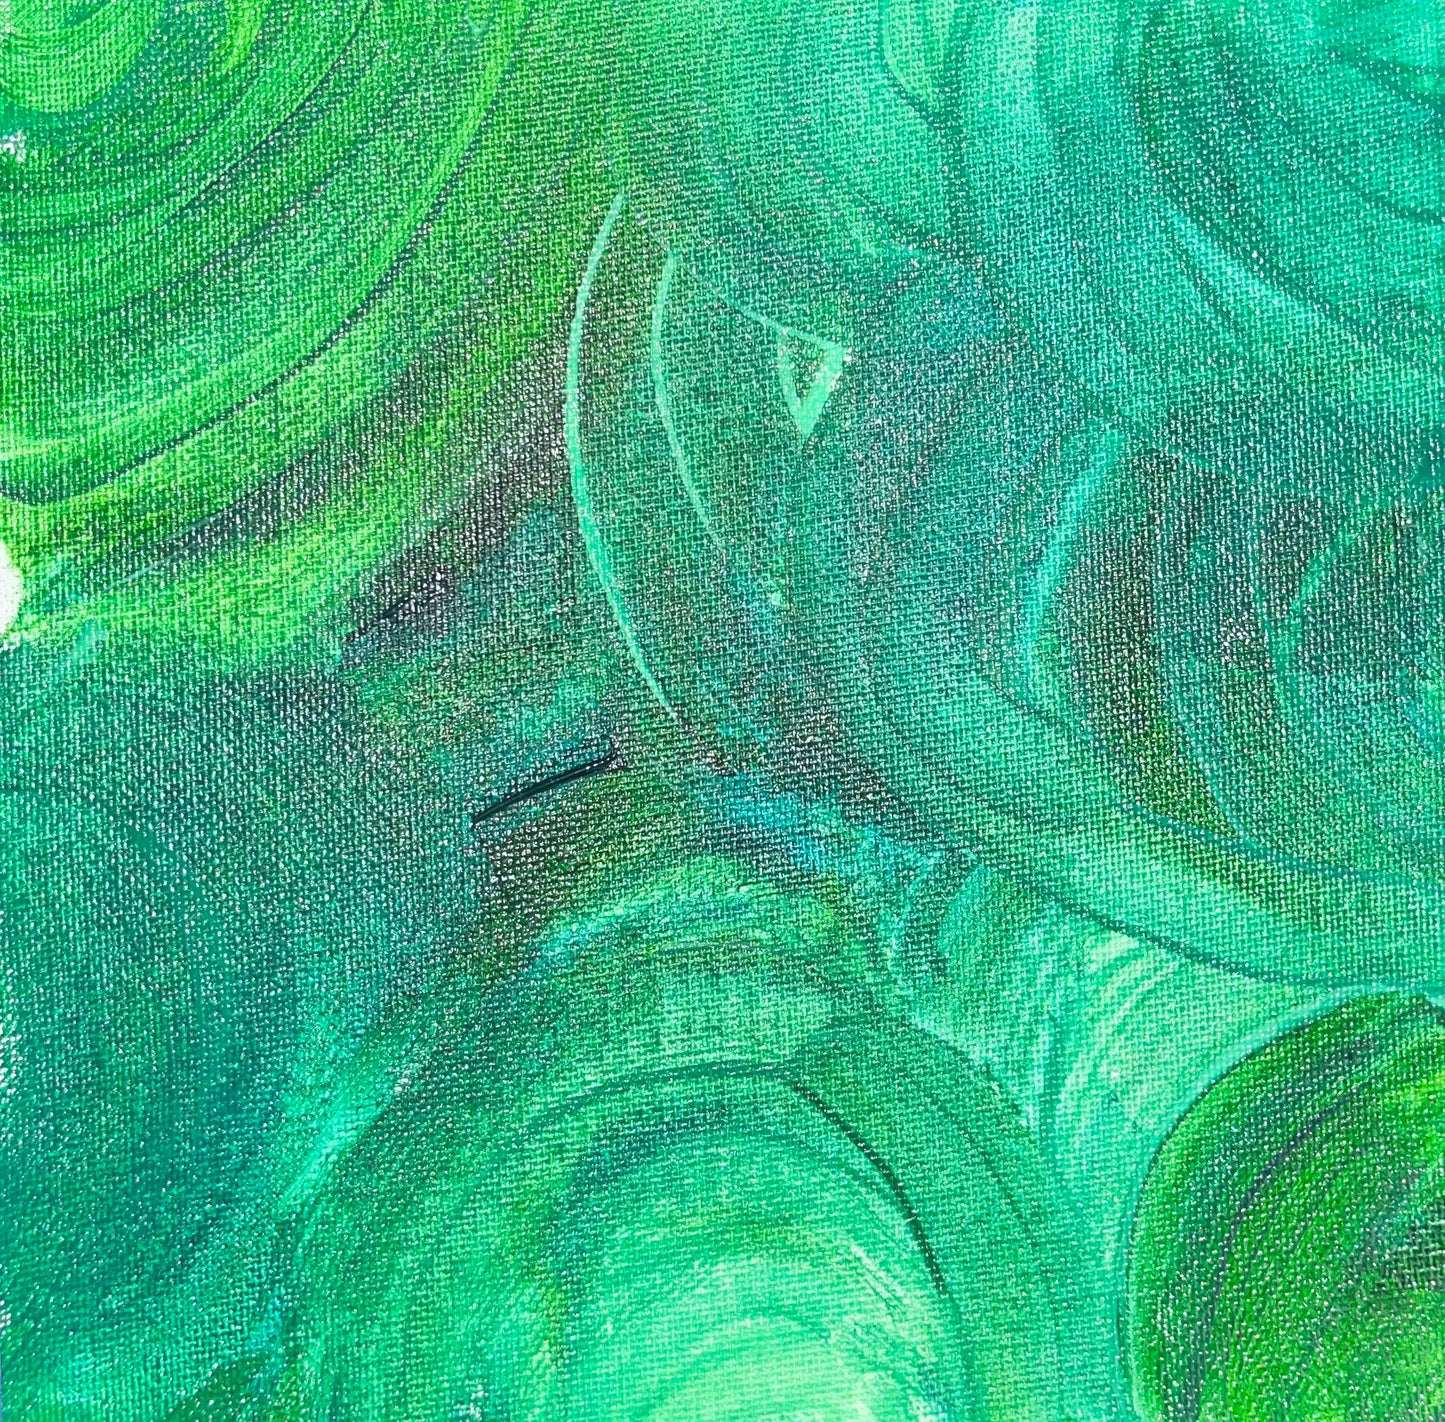 GREEN Painting